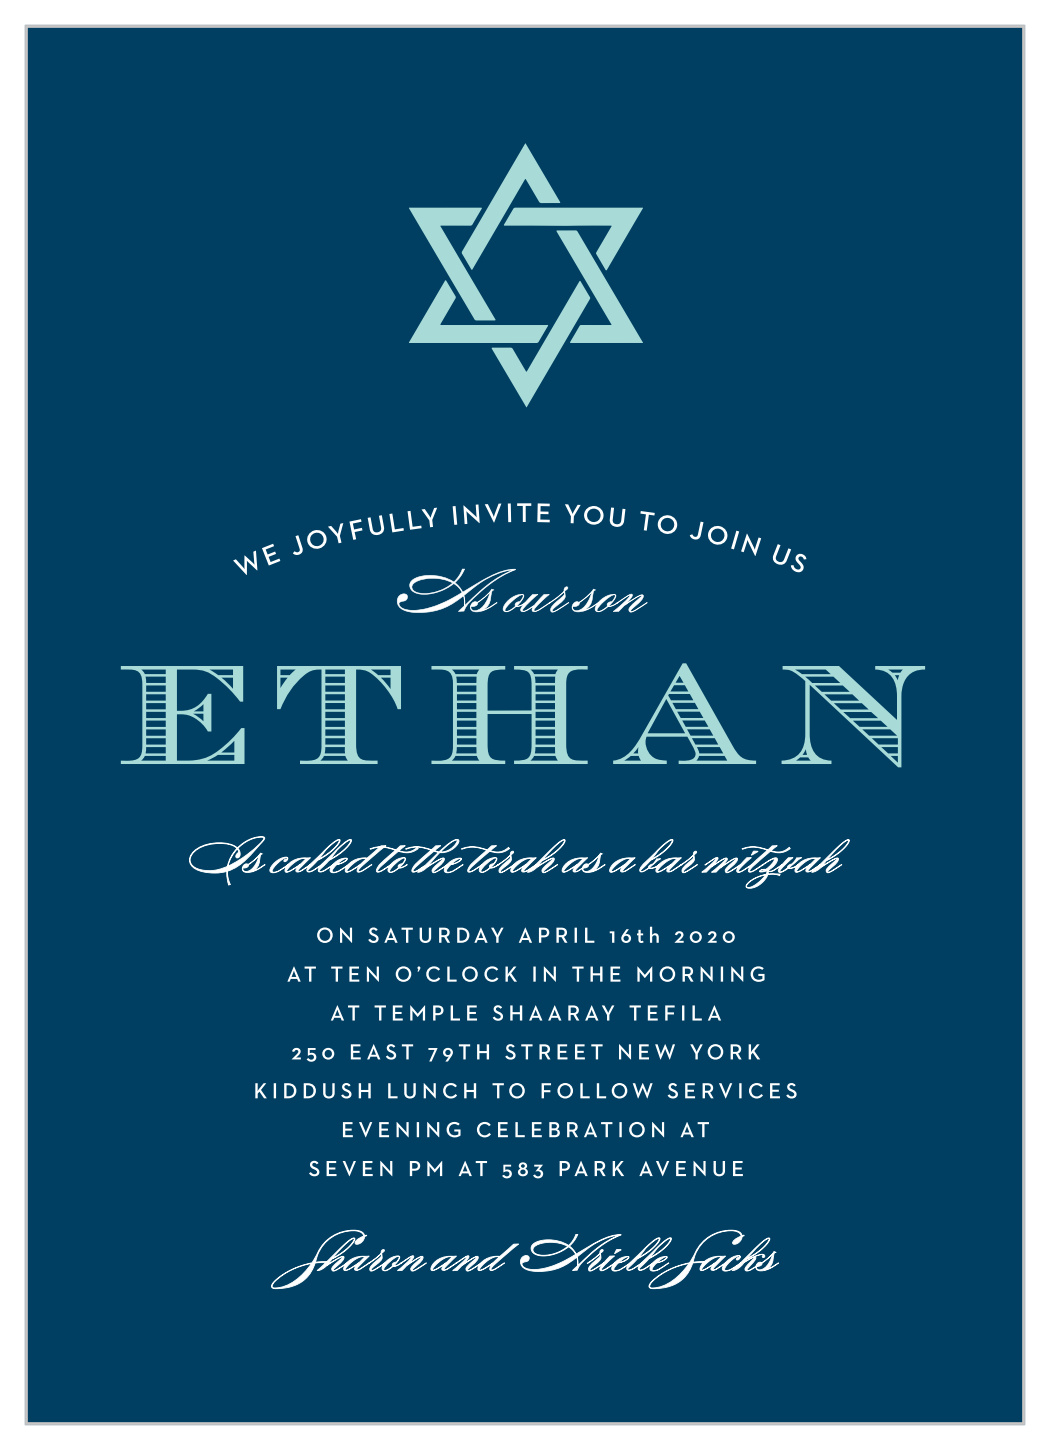 traditions-bar-mitzvah-invitations-from-basic-invite